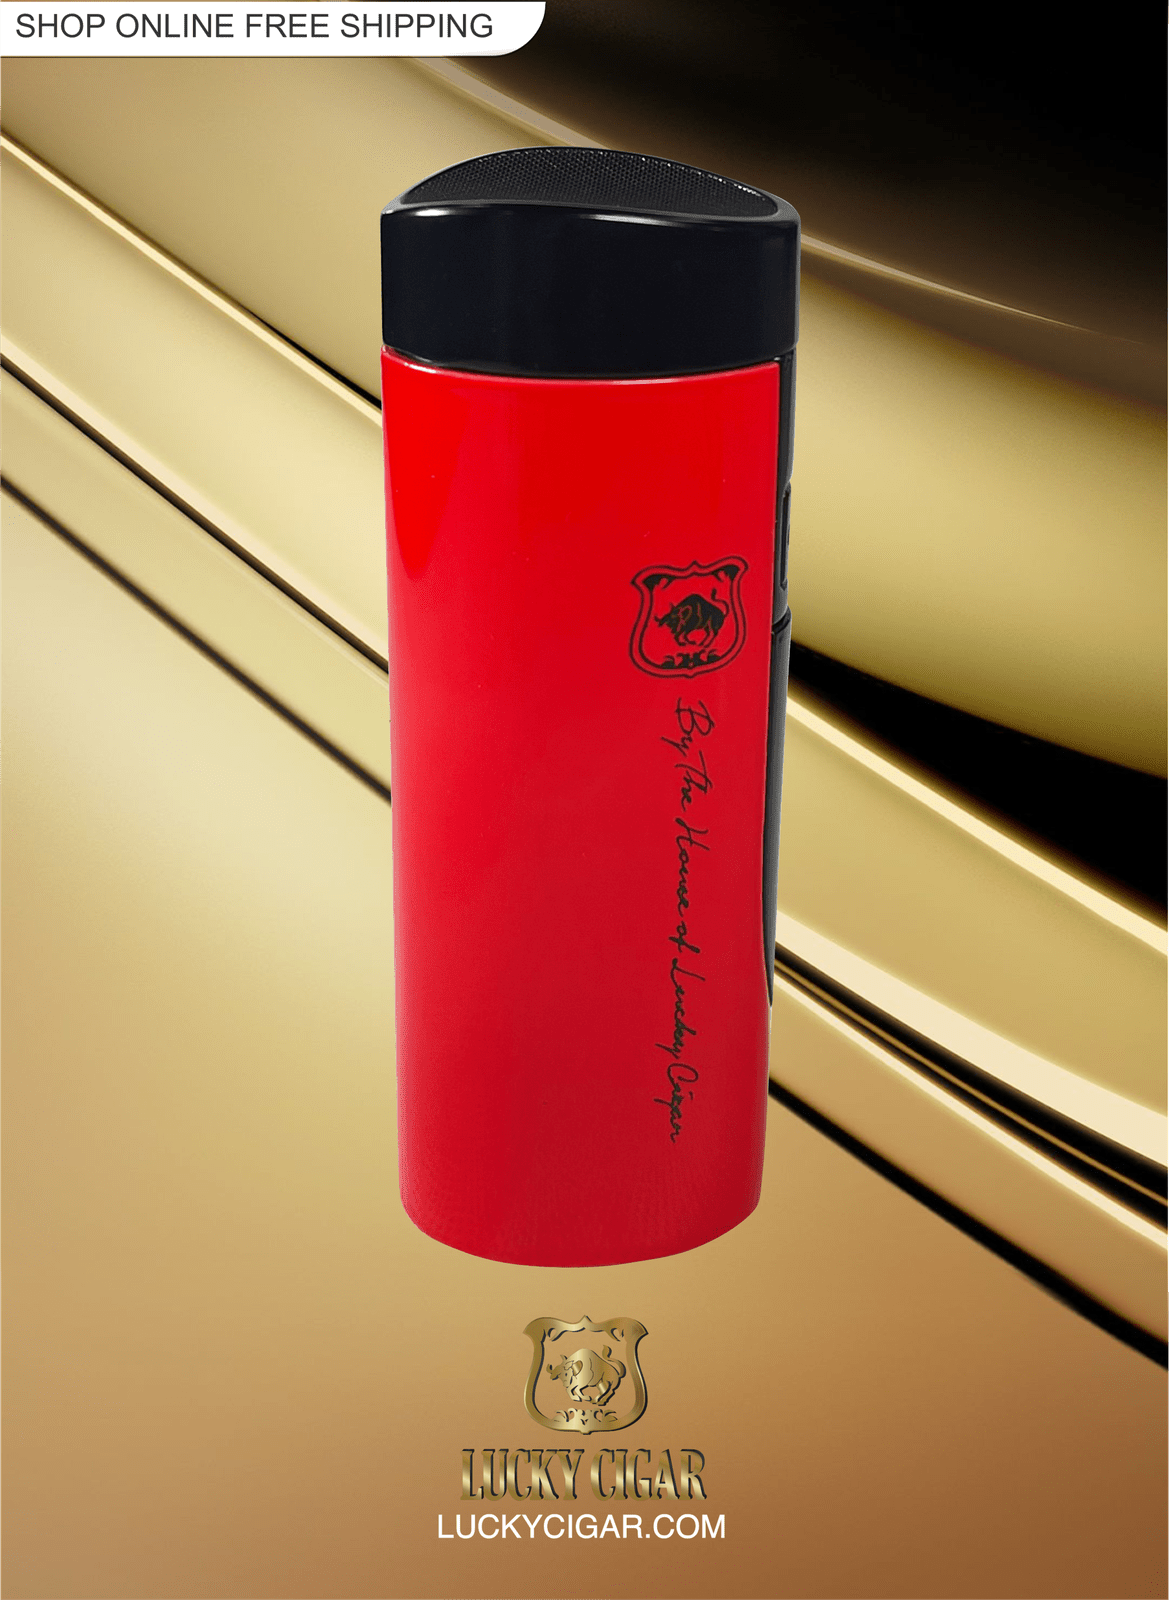 Cigar Lifestyle Accessories: Torch Lighter in Red/Black